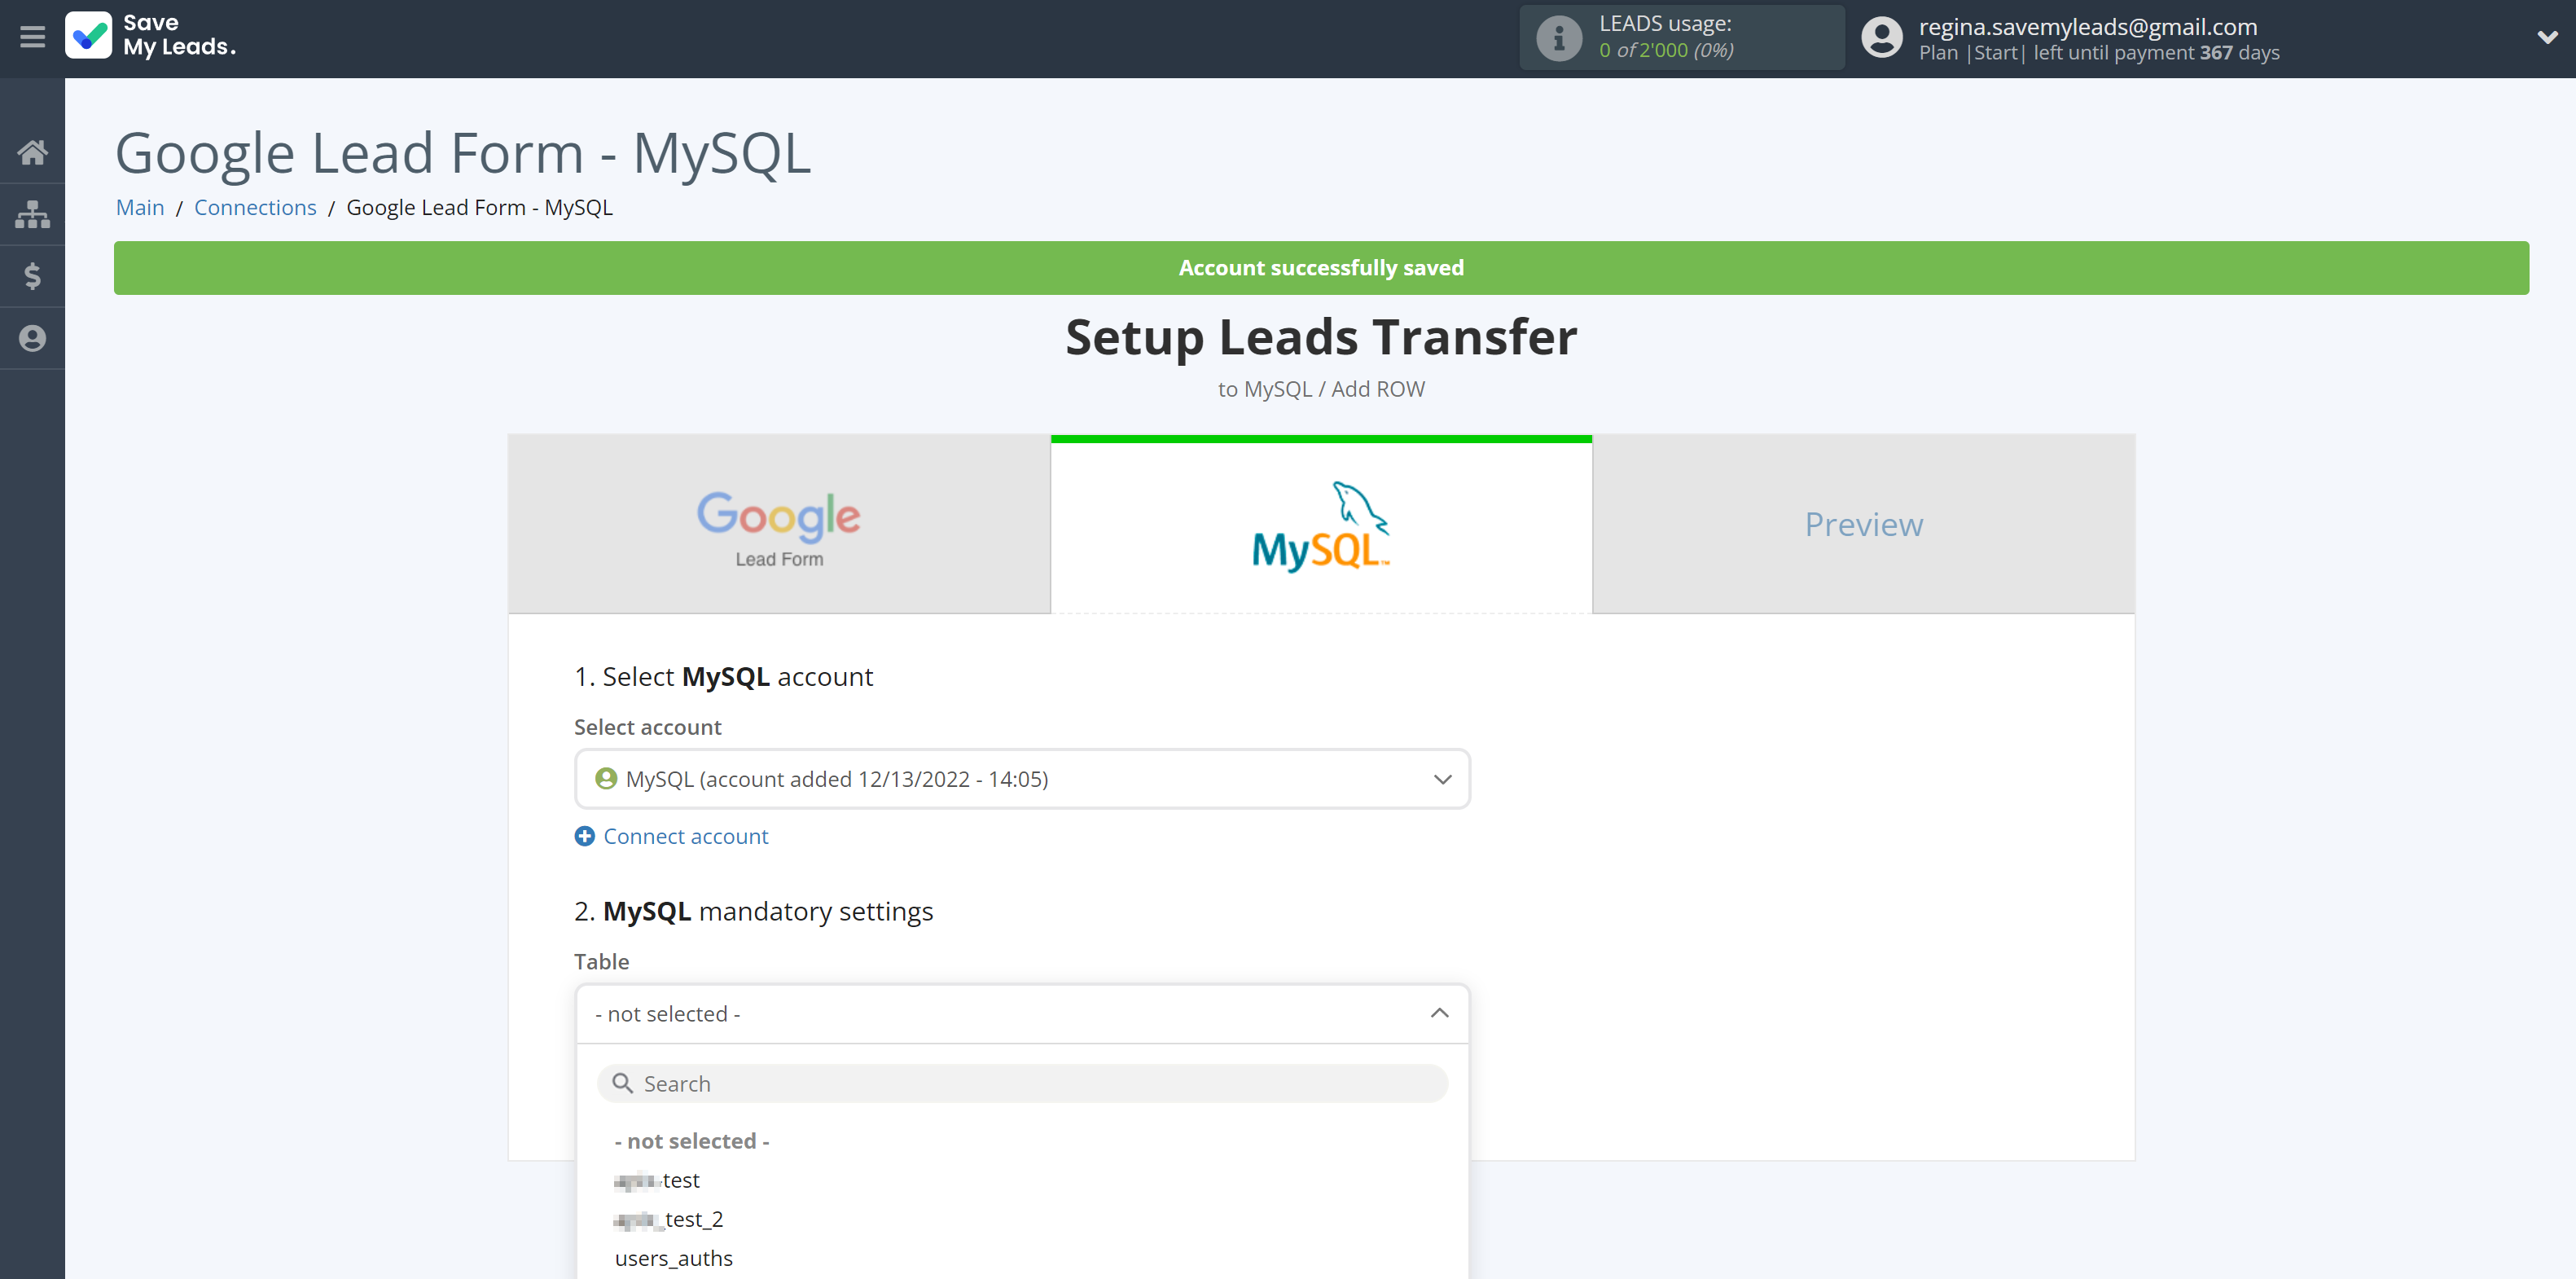 How to Connect Google Lead Form with MySQL | Table selection